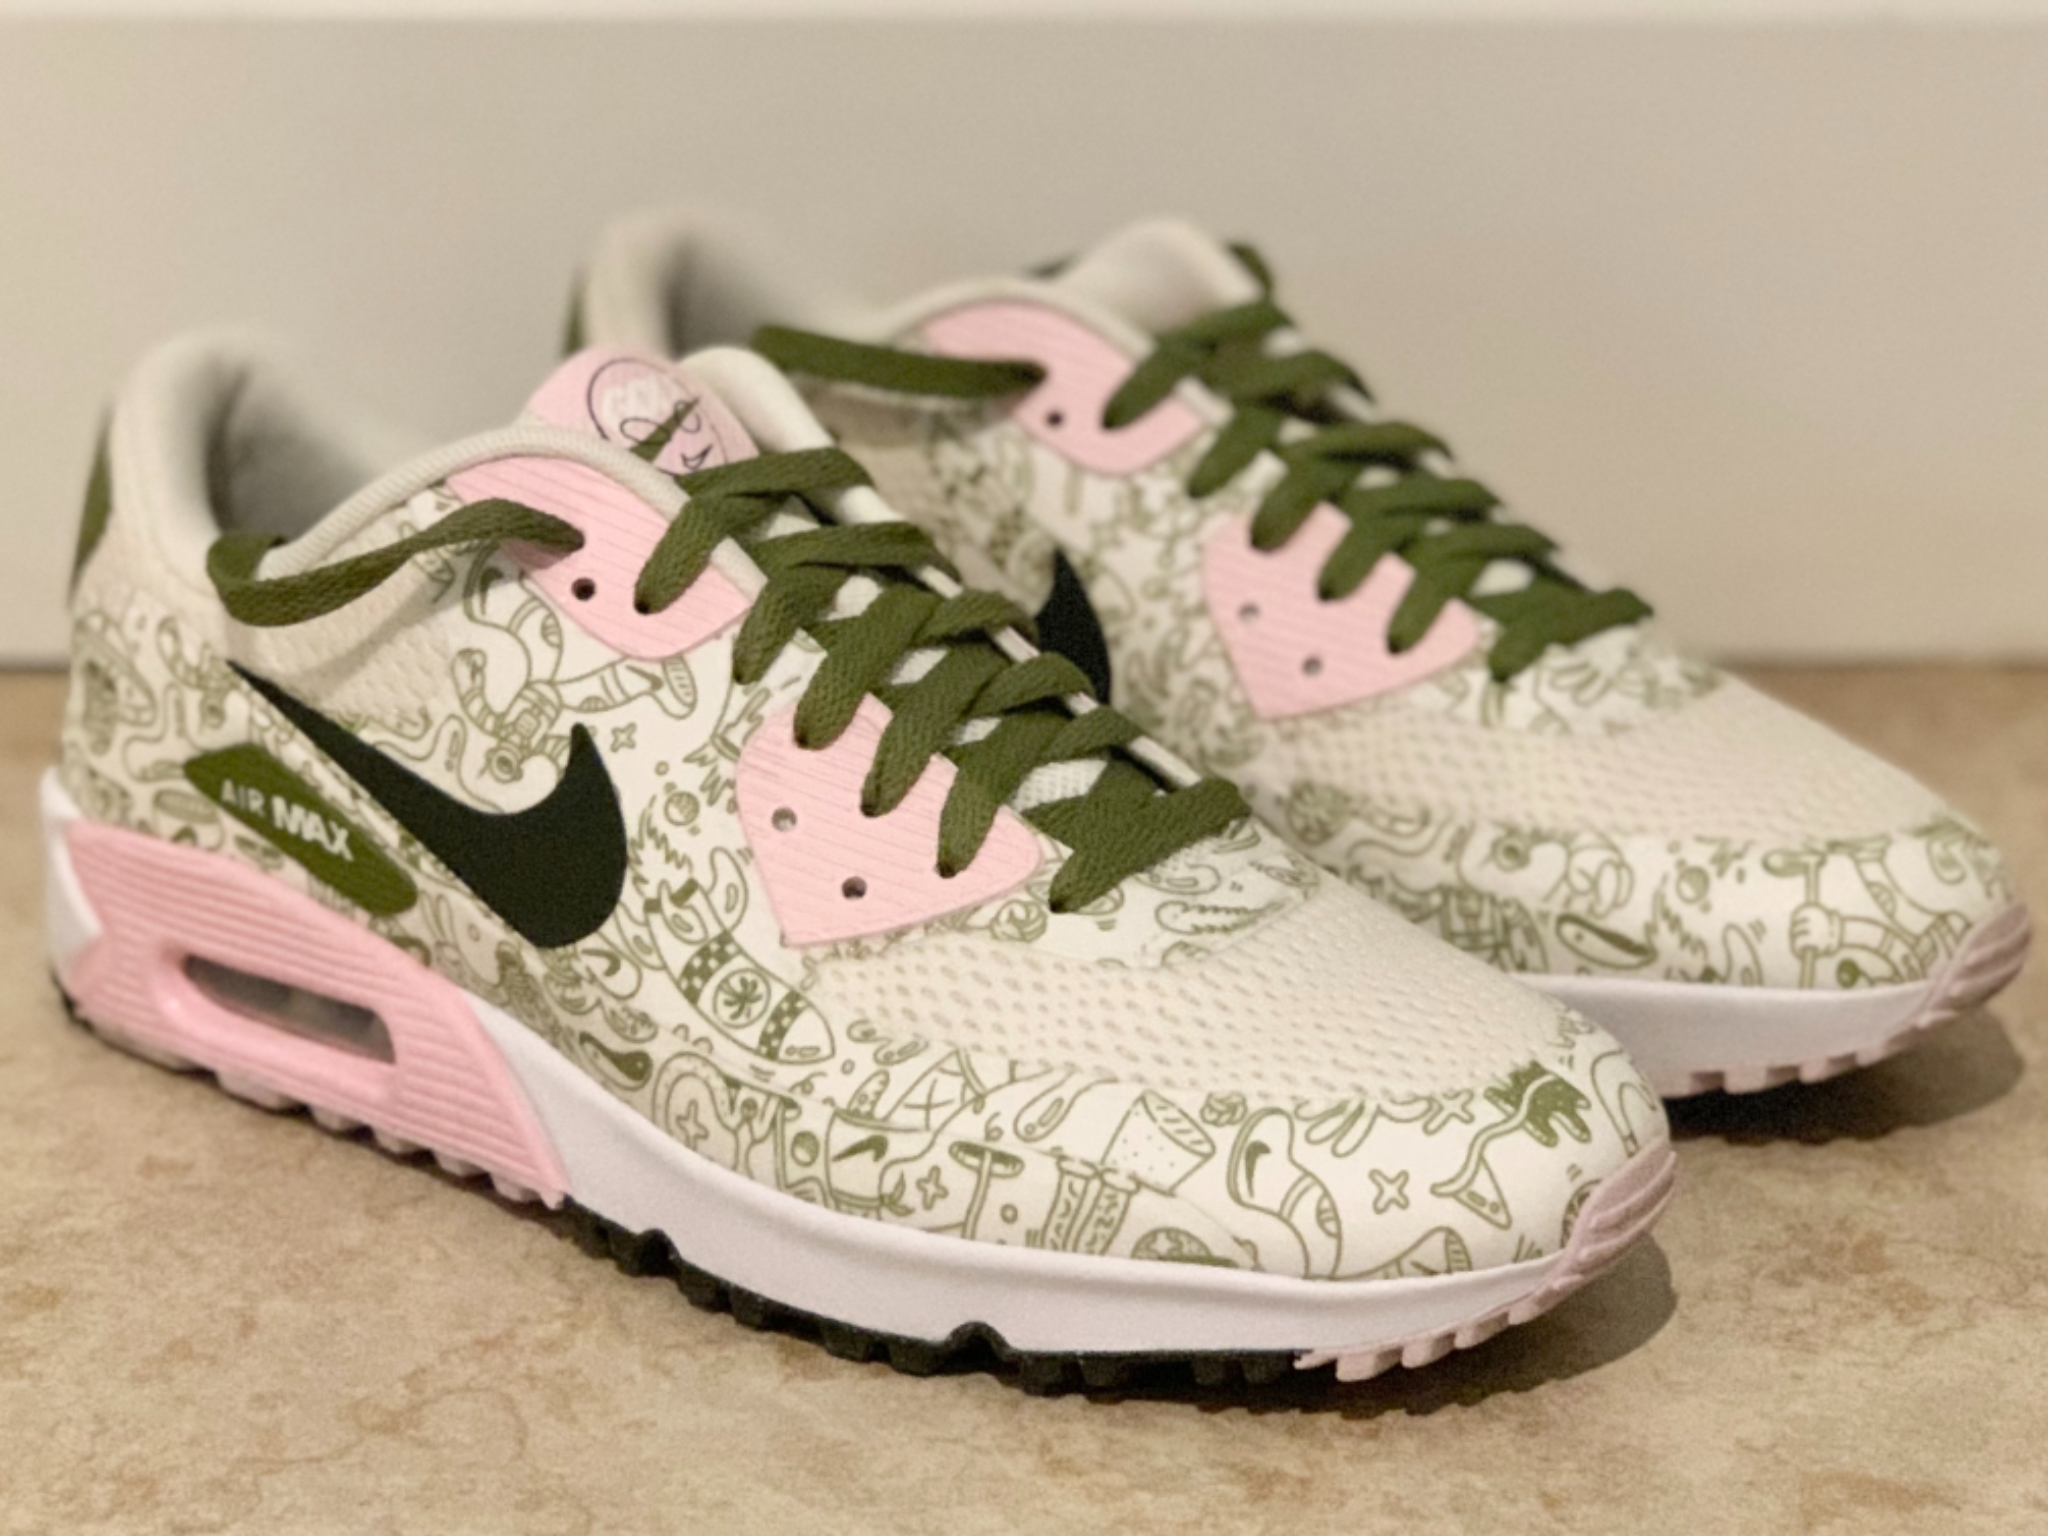 Coolest thing for sale in the GolfWRX Classifieds (06/9/21): Nike Max 90 NRG shoes – GolfWRX